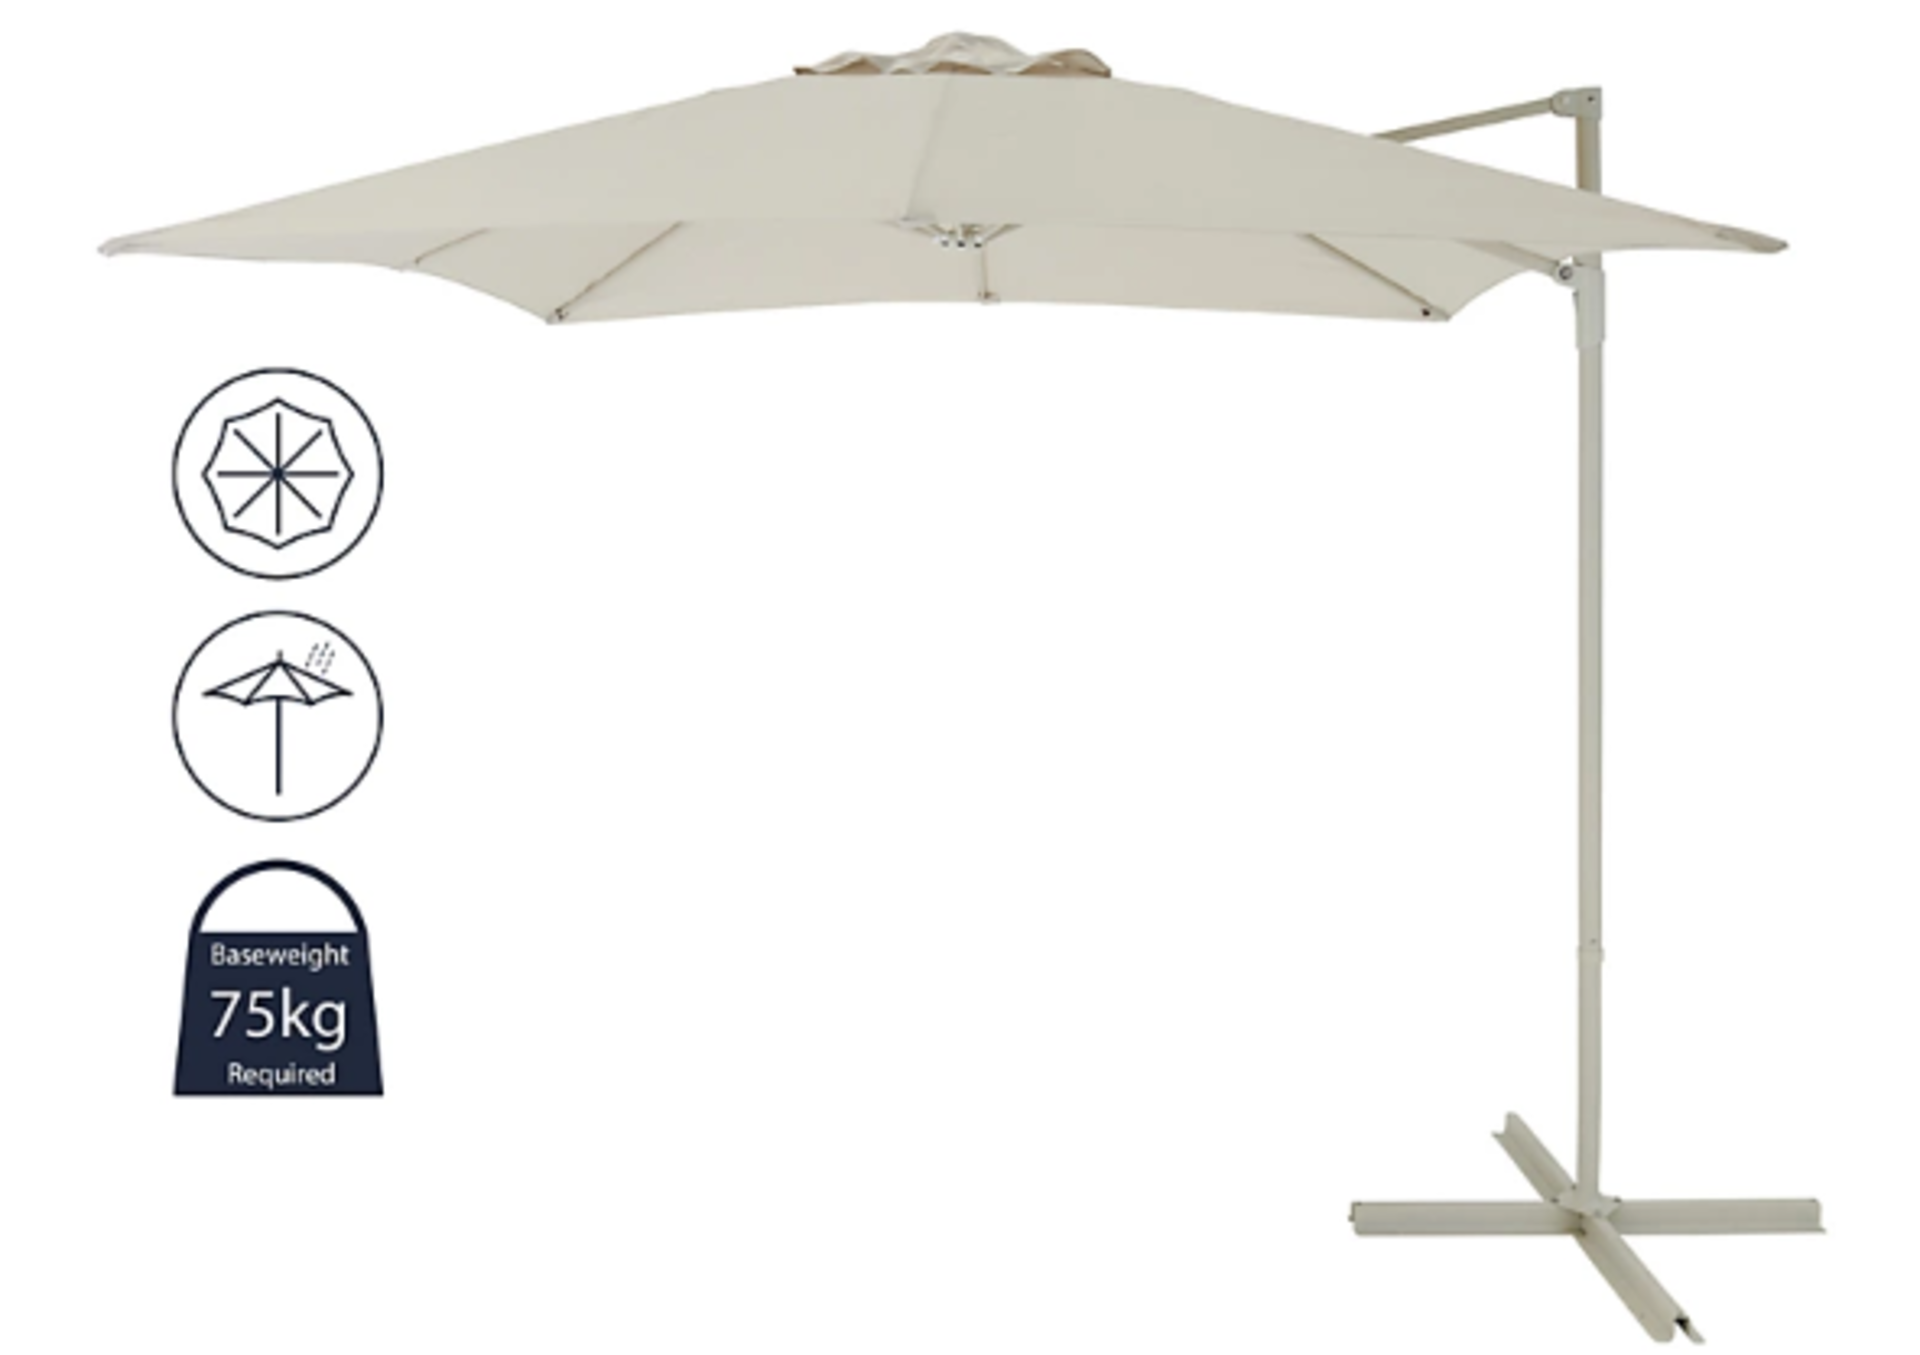 New & Boxed Luxury 2.5m Sand Overhanging Parasol- Sand. This square overhanging parasol provides - Image 7 of 8